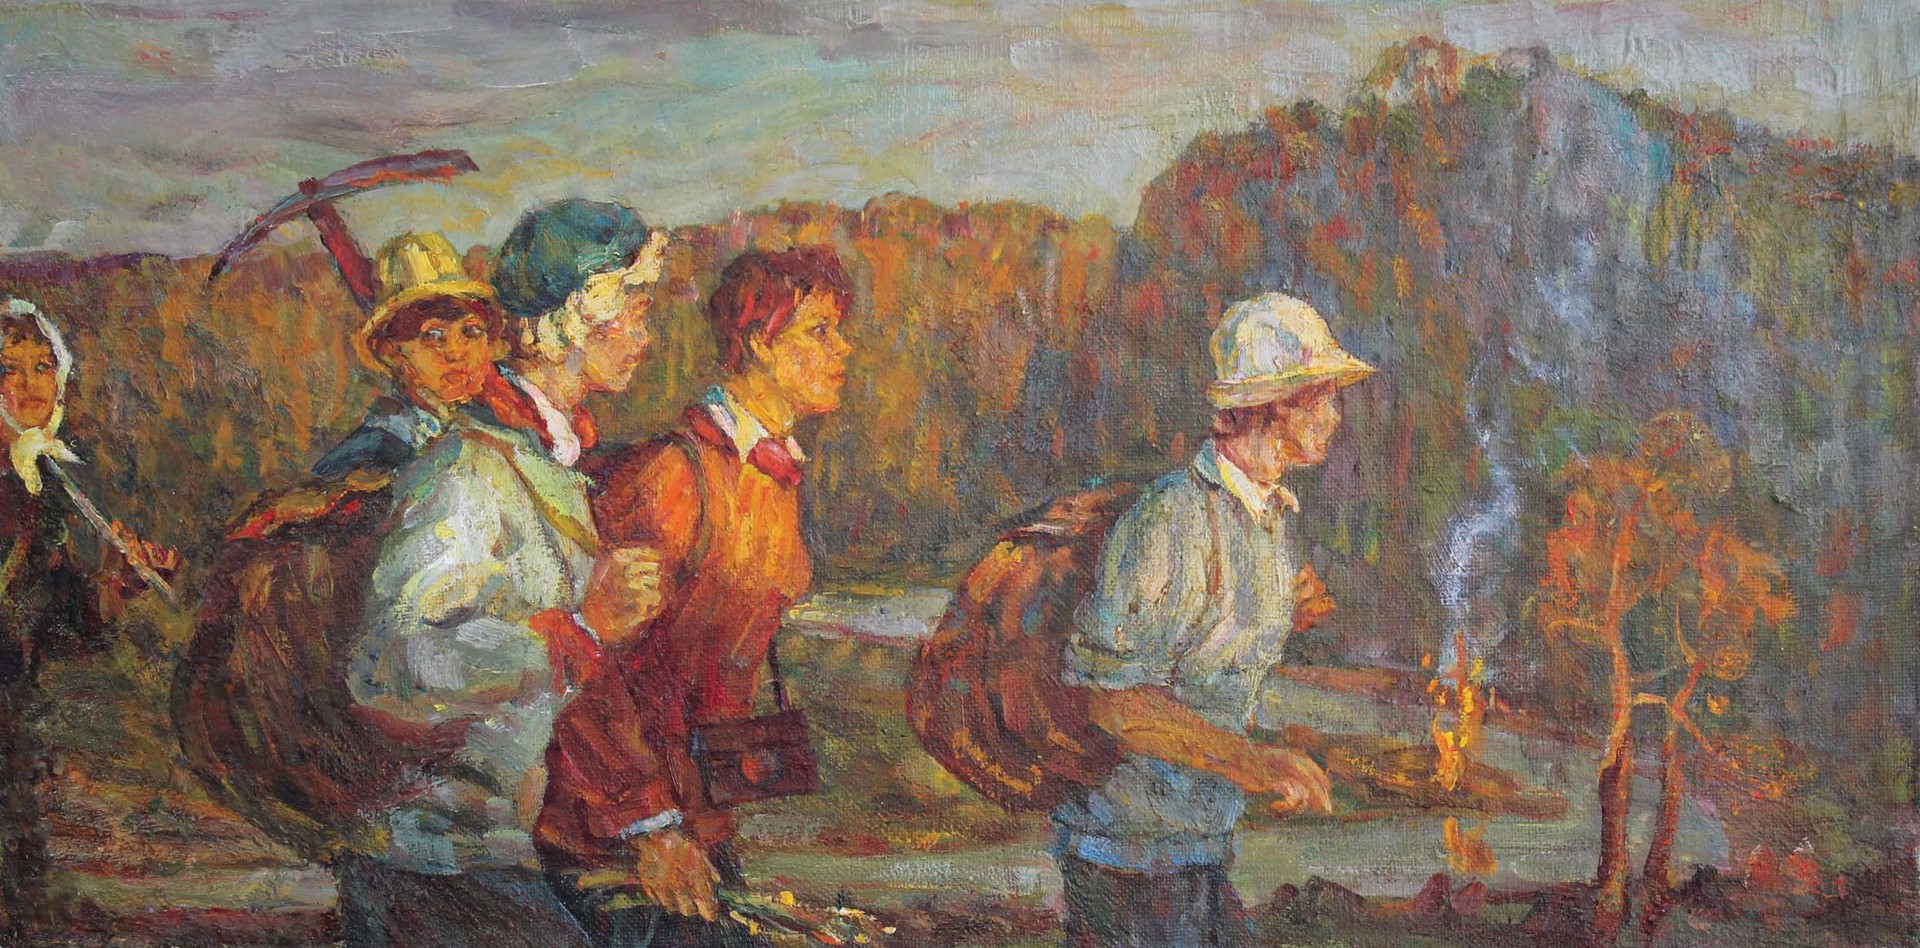 Students from the Urals by Andrei Bulekov